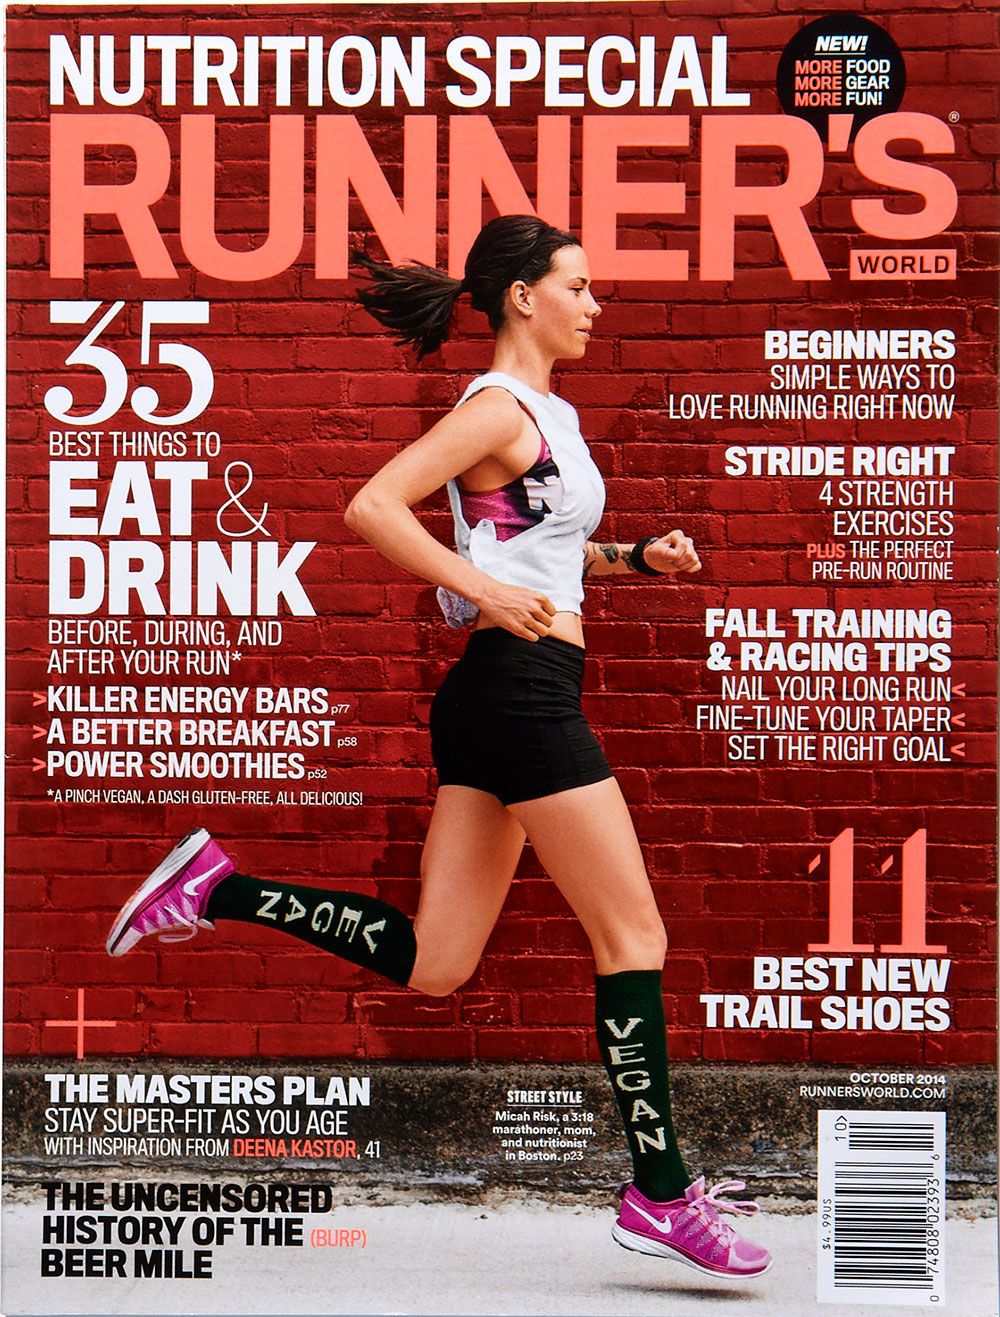 Winterport native appears on cover of Runner's World magazine